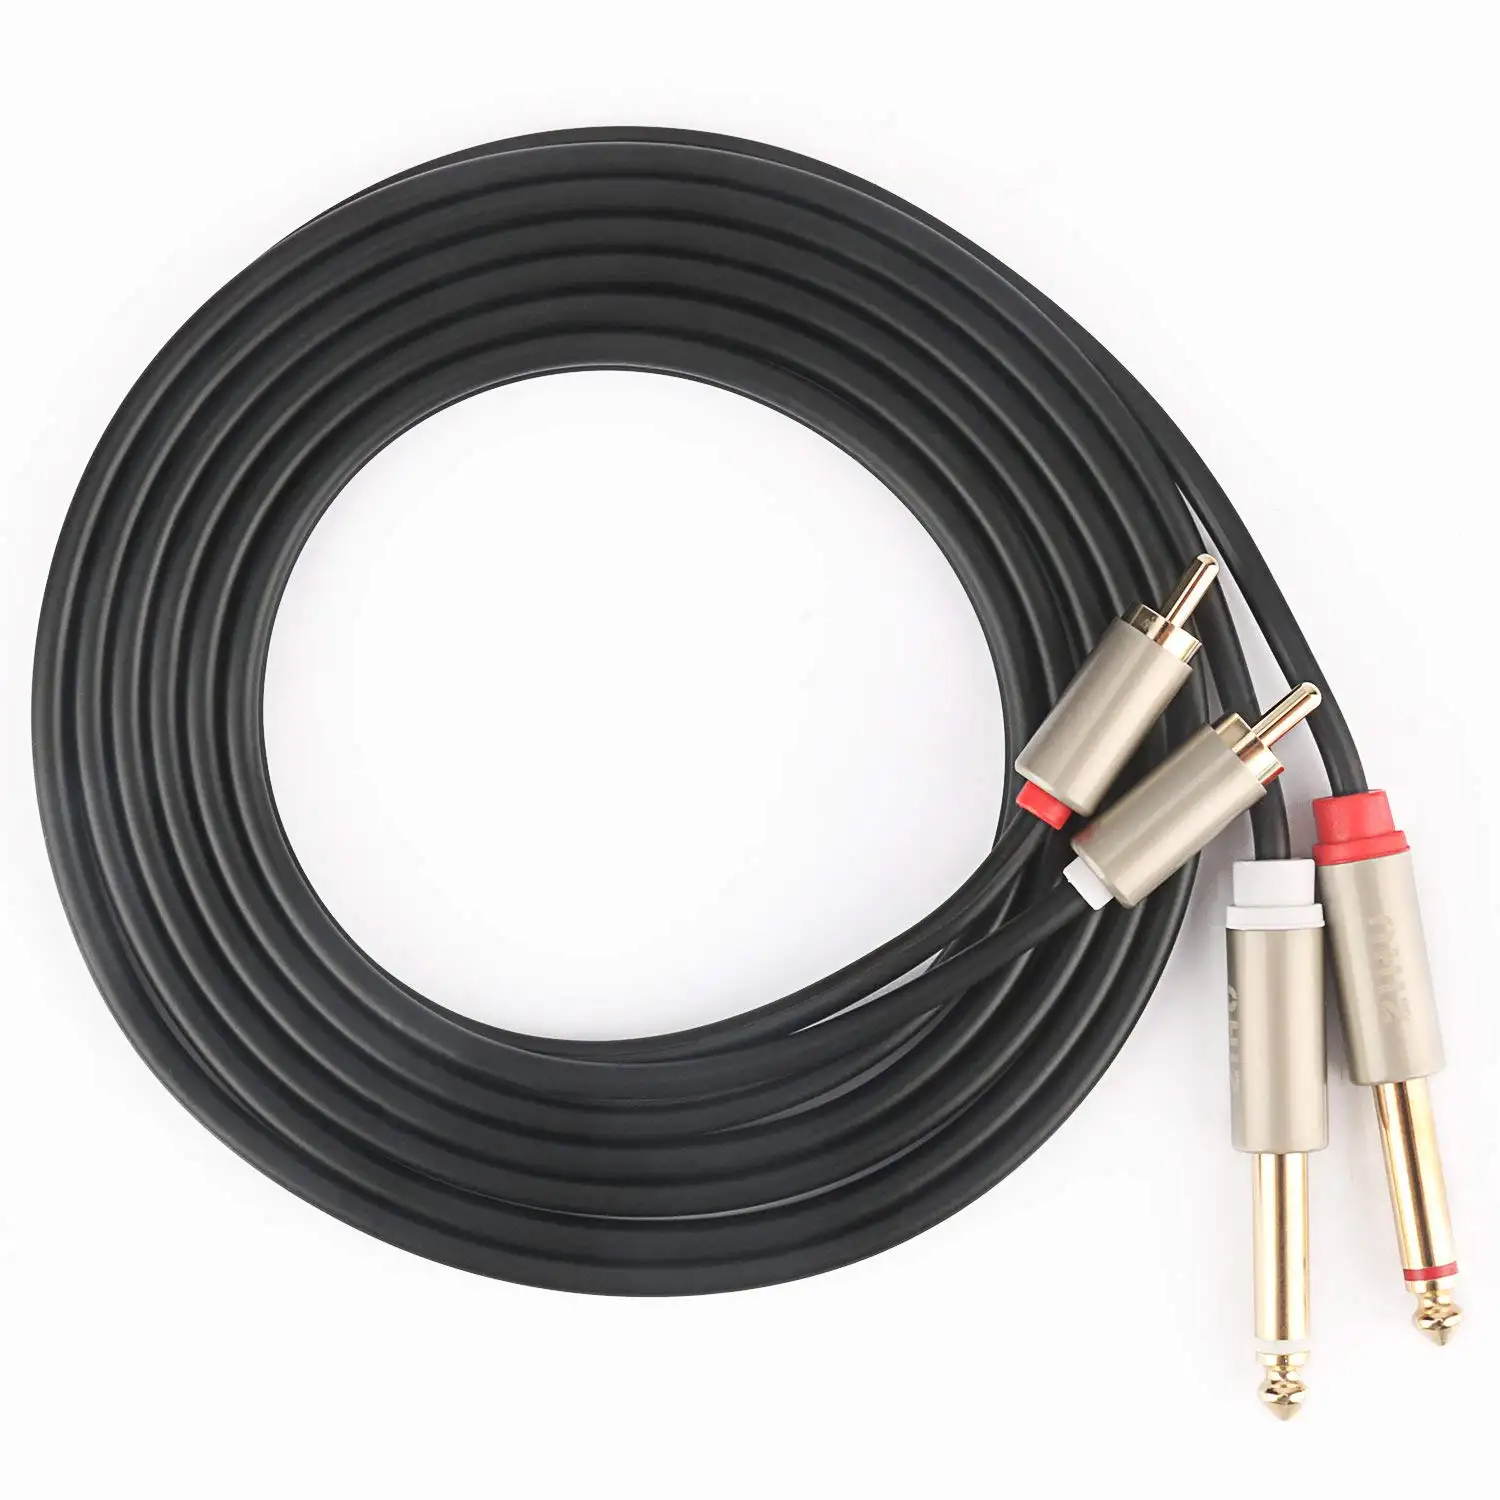 Dual RCA to Dual Mono 6.35mm Male Jack Audio Cable 2RCA to 2 6.35 DVD Mixer Wire for Amplifier Speakers TV AV 2m/3m/5m/8m